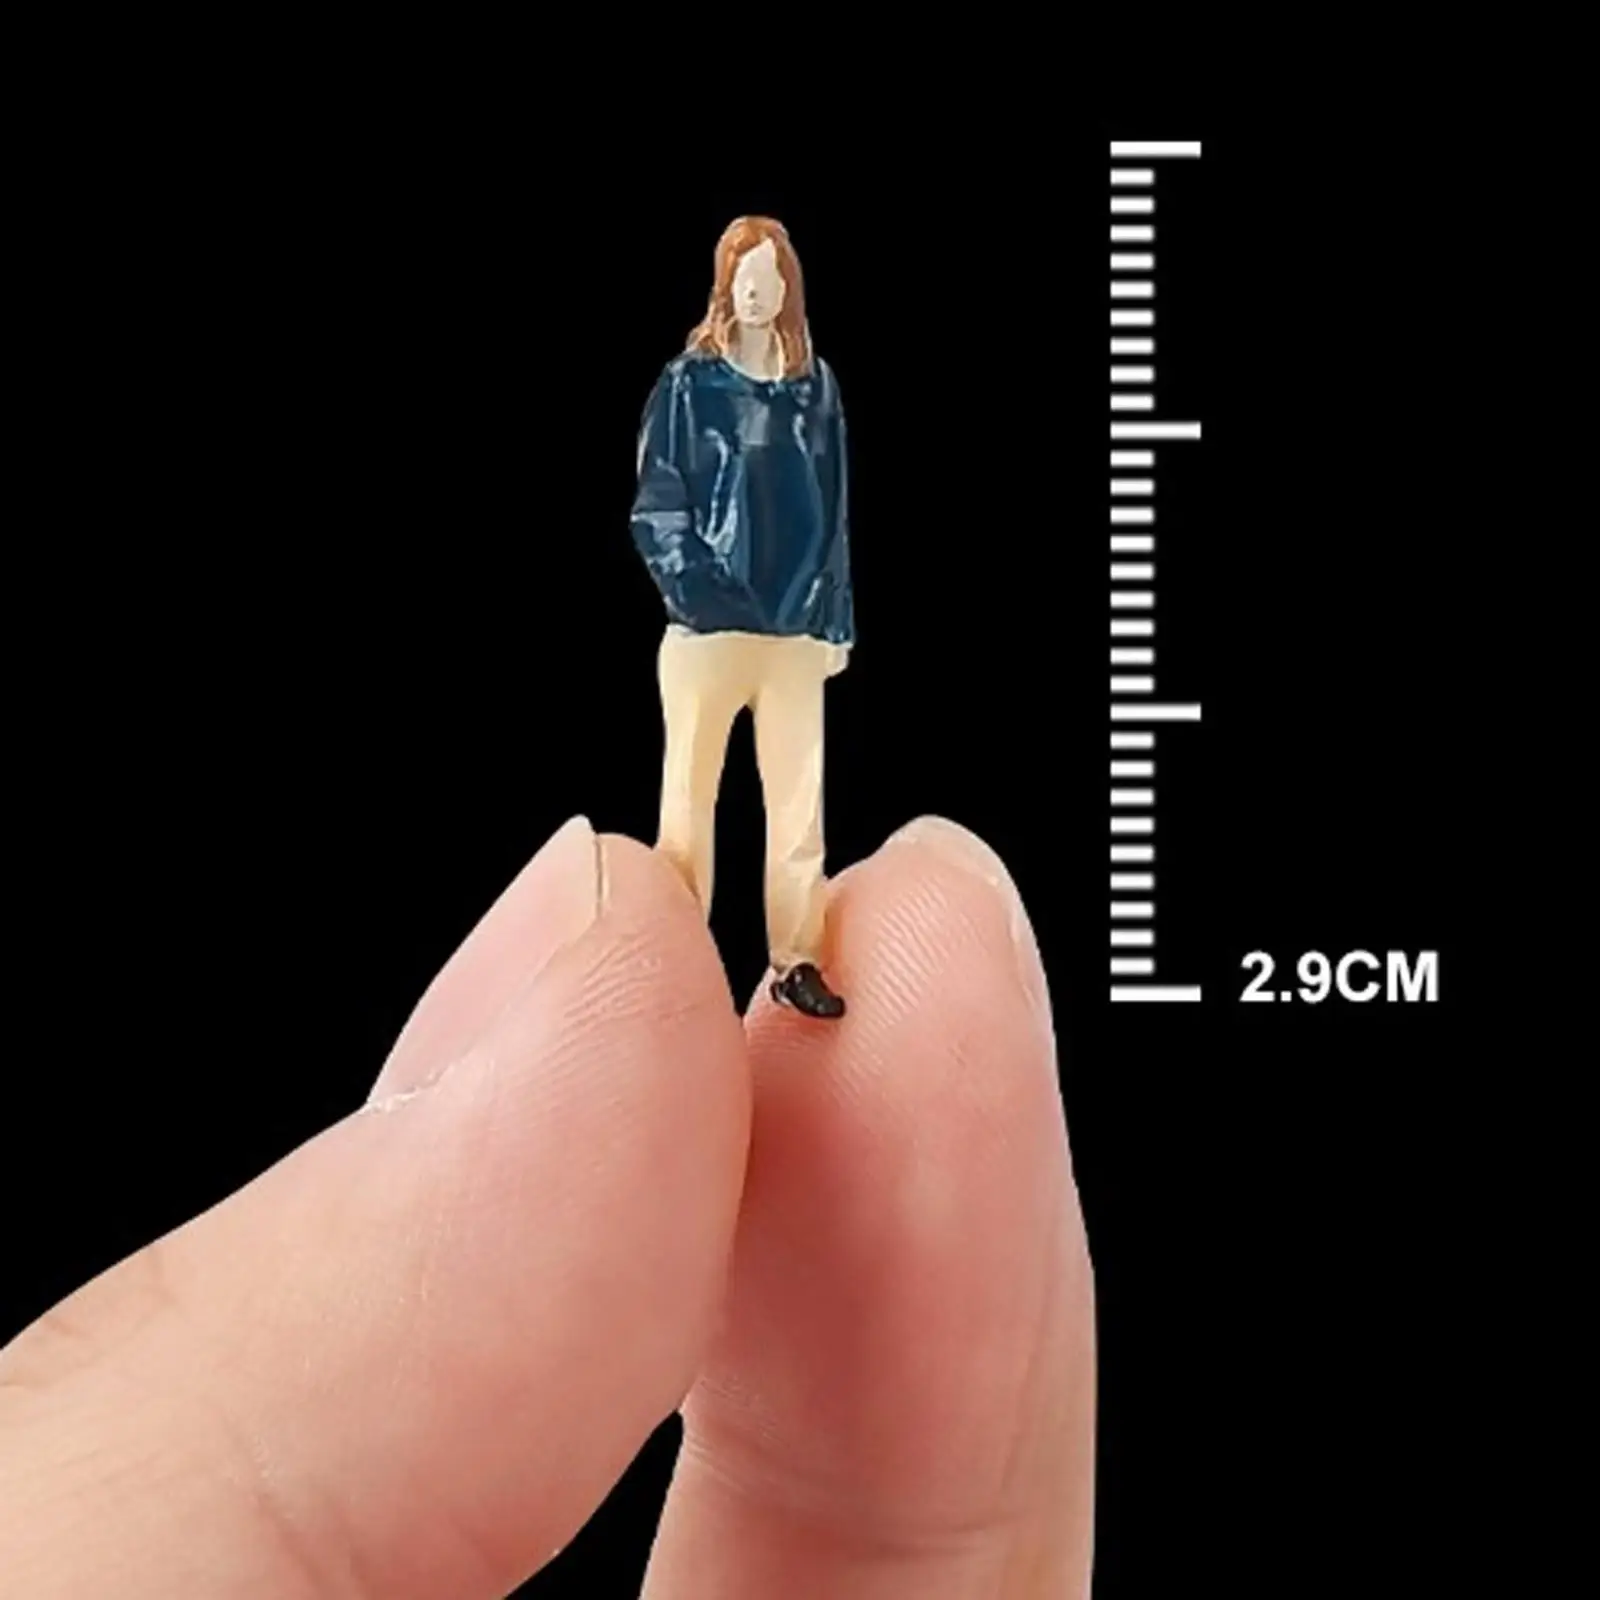 1/64 Scale Figure Cool Girl Miniature Tiny People Handpainted for Model Trains Layout Micro Landscape Railroad Scenes Diorama